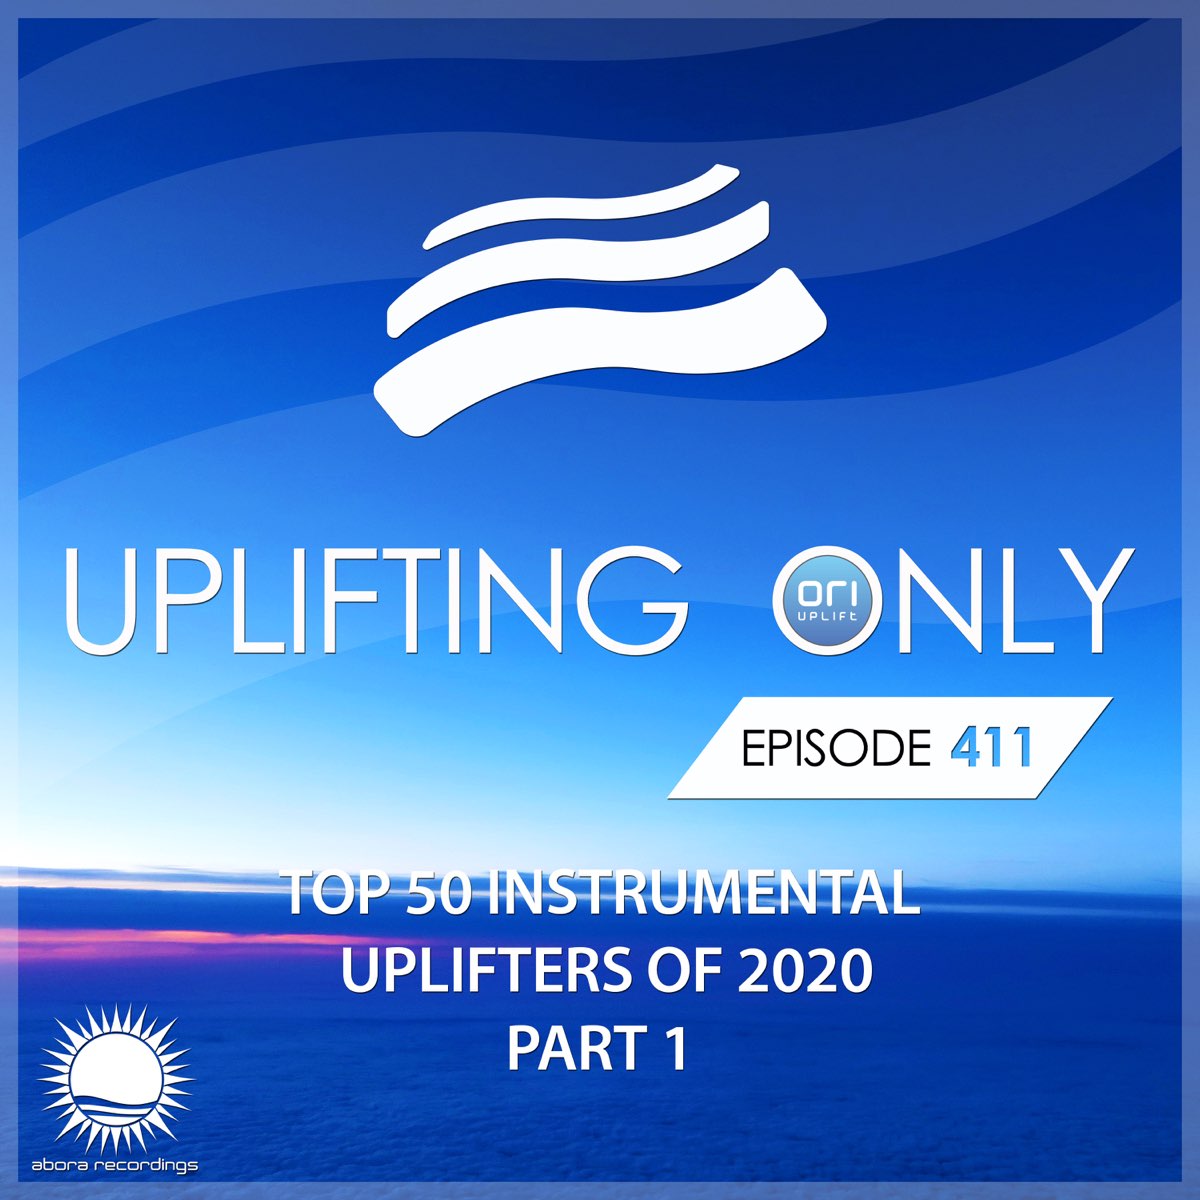 Uplifting only 536. Uplifter. Ori uplift - first Symphonic Breakdown year Mix (Continuous Mix). Only ep